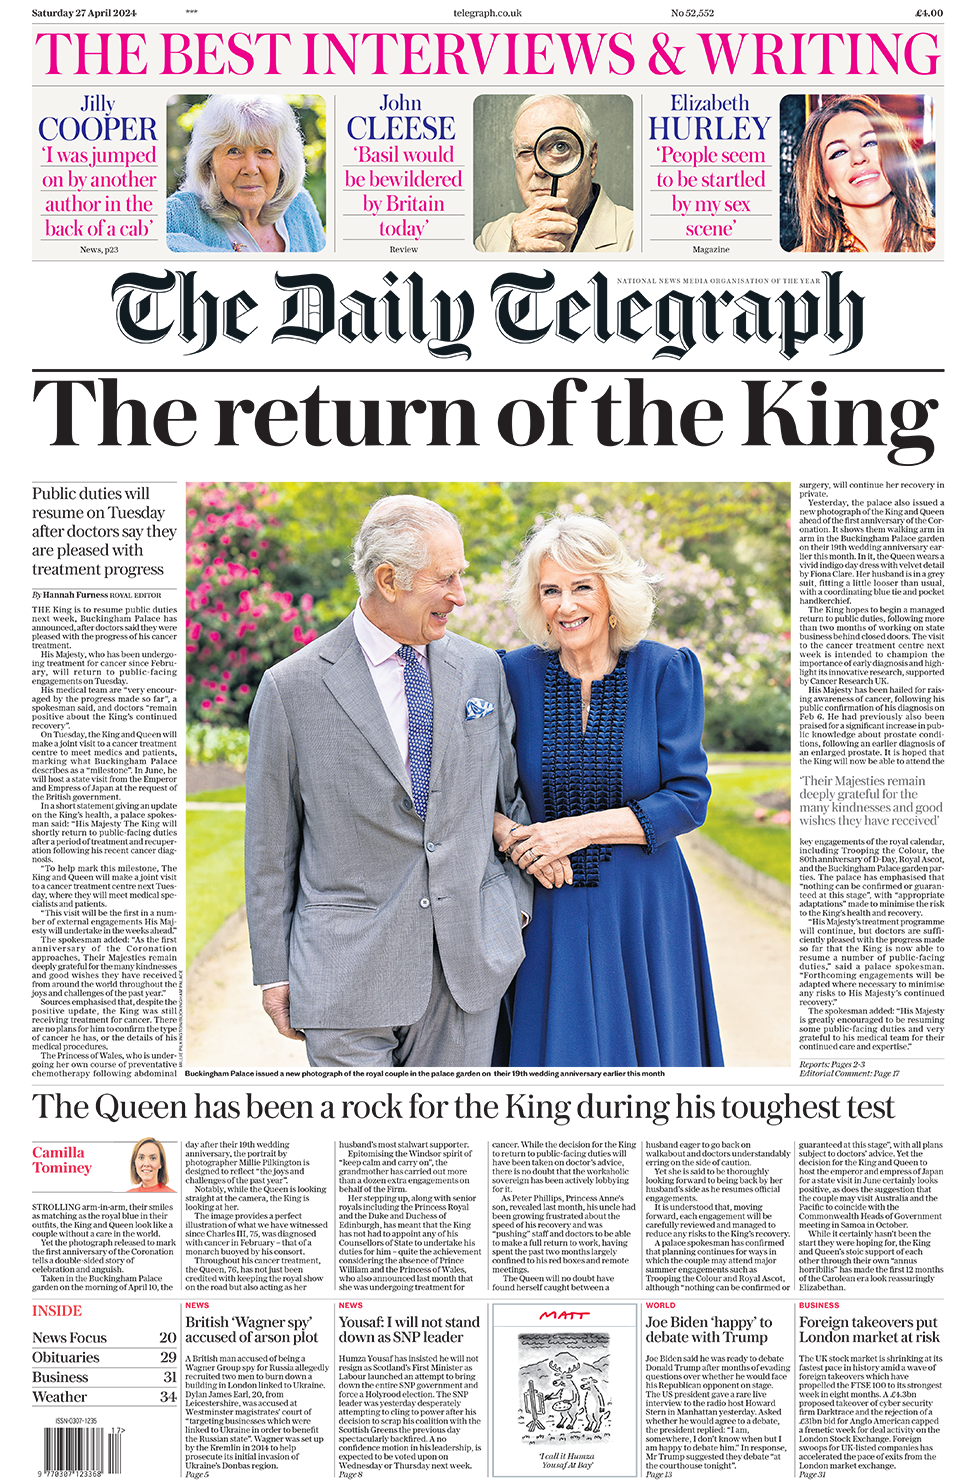 The headline in the Telegraph reads: "The return of the King".